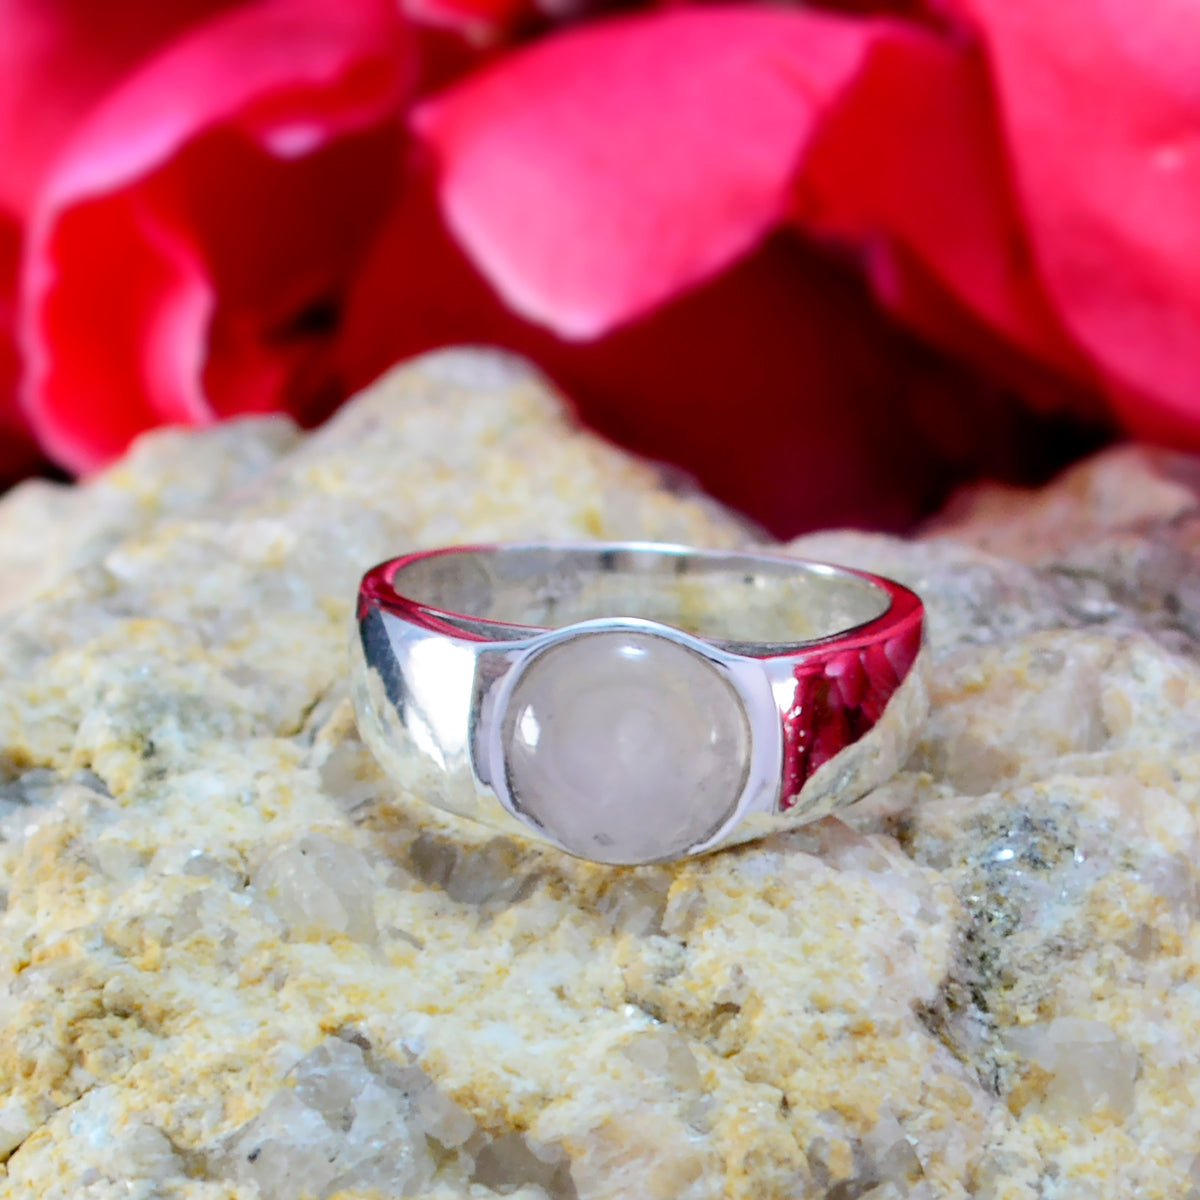 Attractive Gem Rose Quartz Sterling Silver Ring Jewelry Appraisal Cost